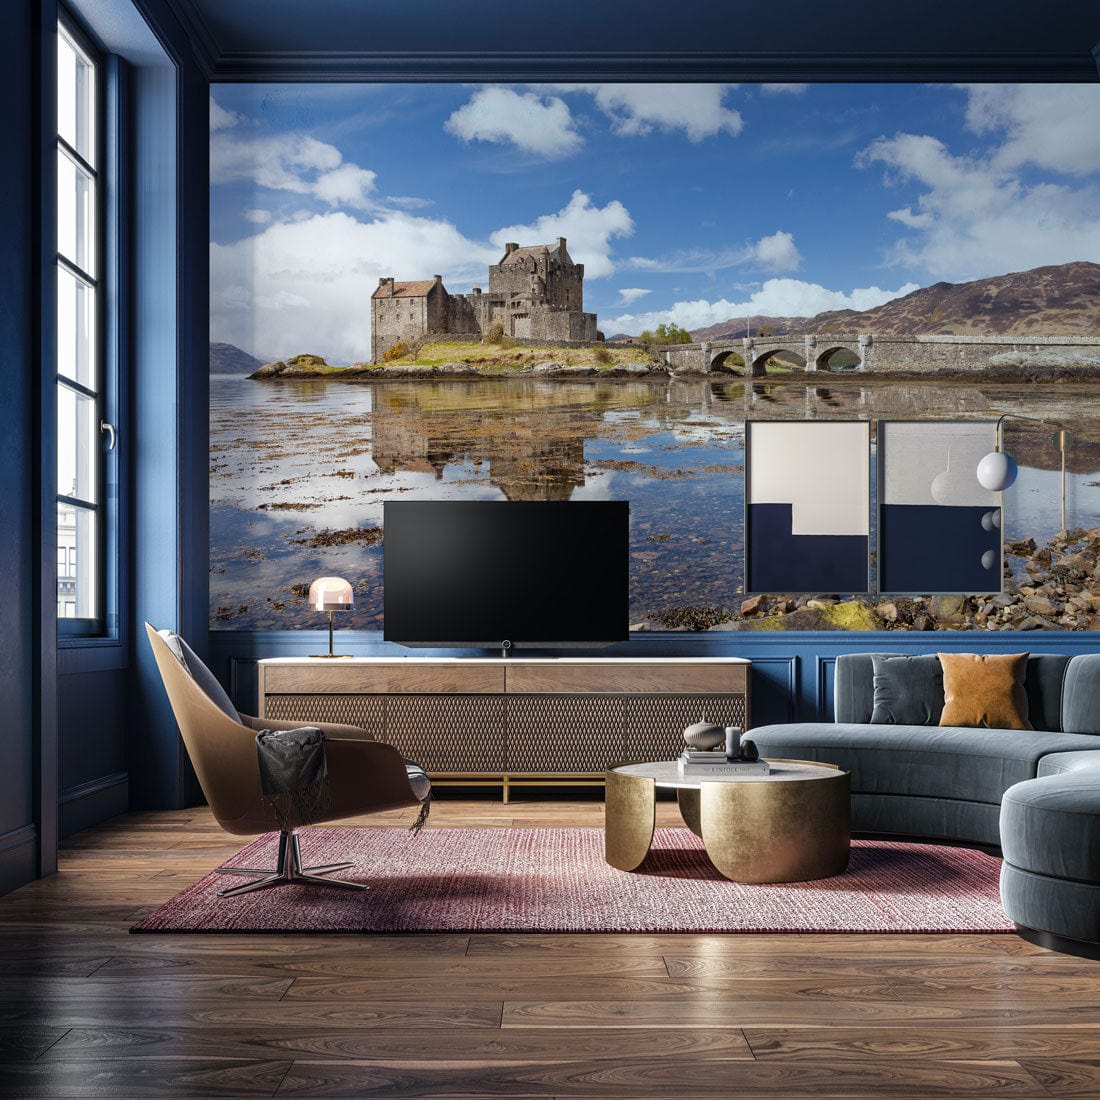 Wallpaper mural featuring a Scottish castle scene for use in decorating a living room